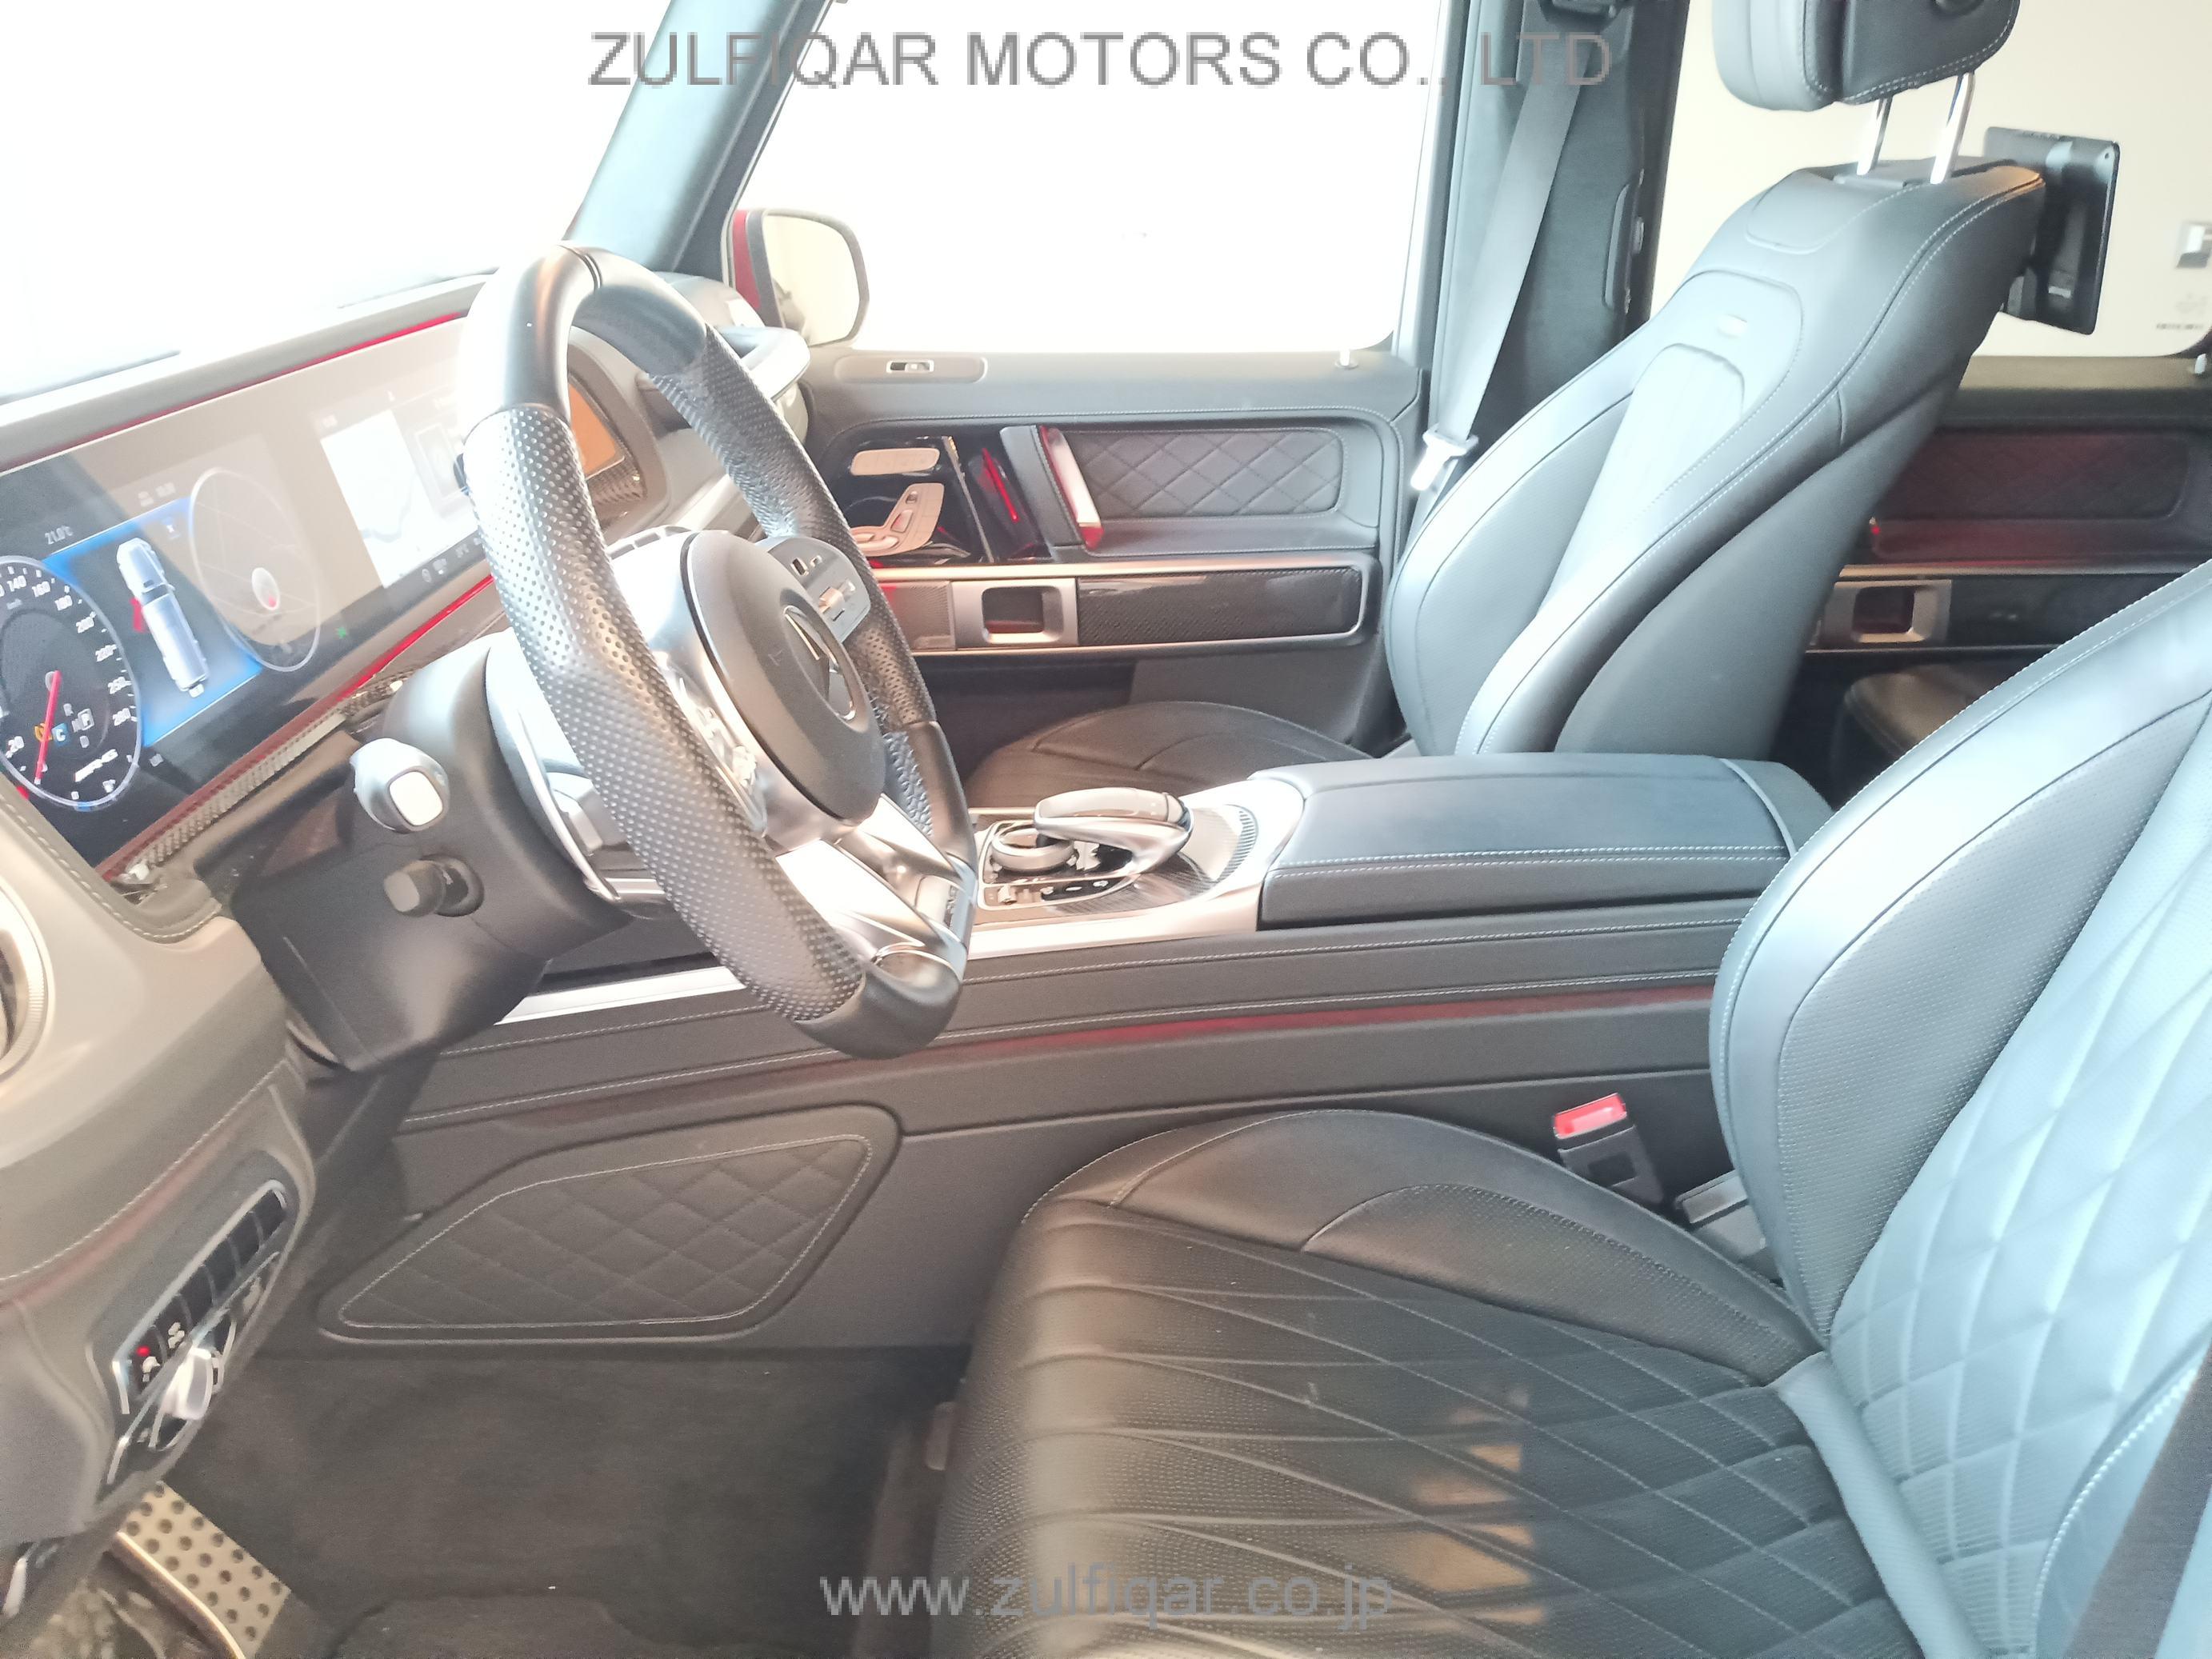 MERCEDES AMG G CLASS 2019 Image 49